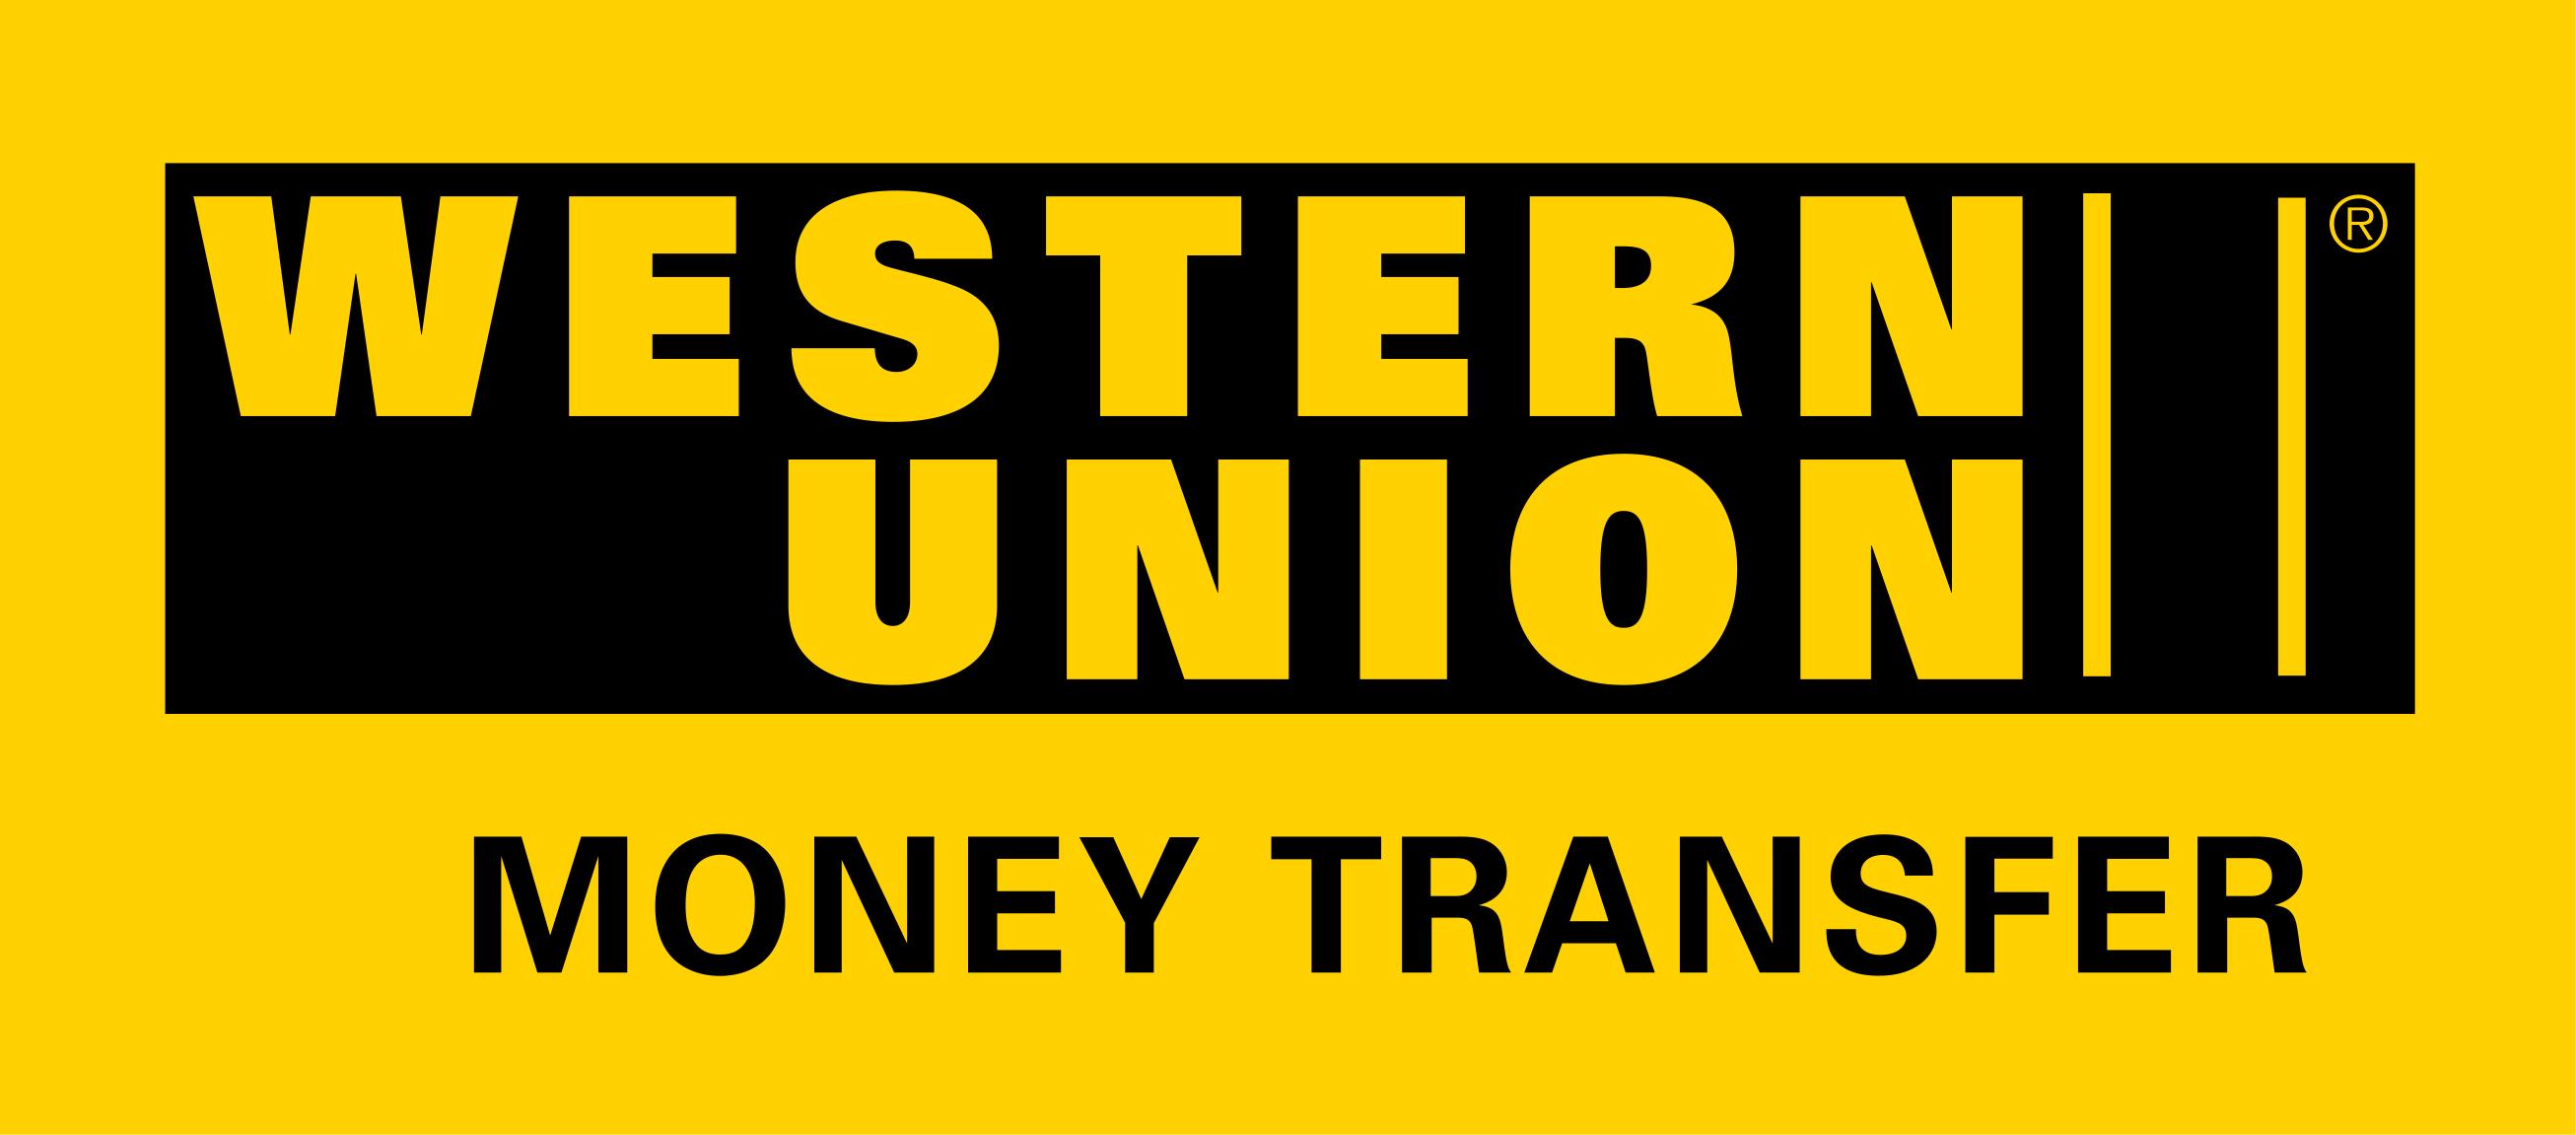 Western Union Adds Bank Account Based Funding Options for Users in 5 Countries Adds Mobile Money Transfer Service in Ivory Coast